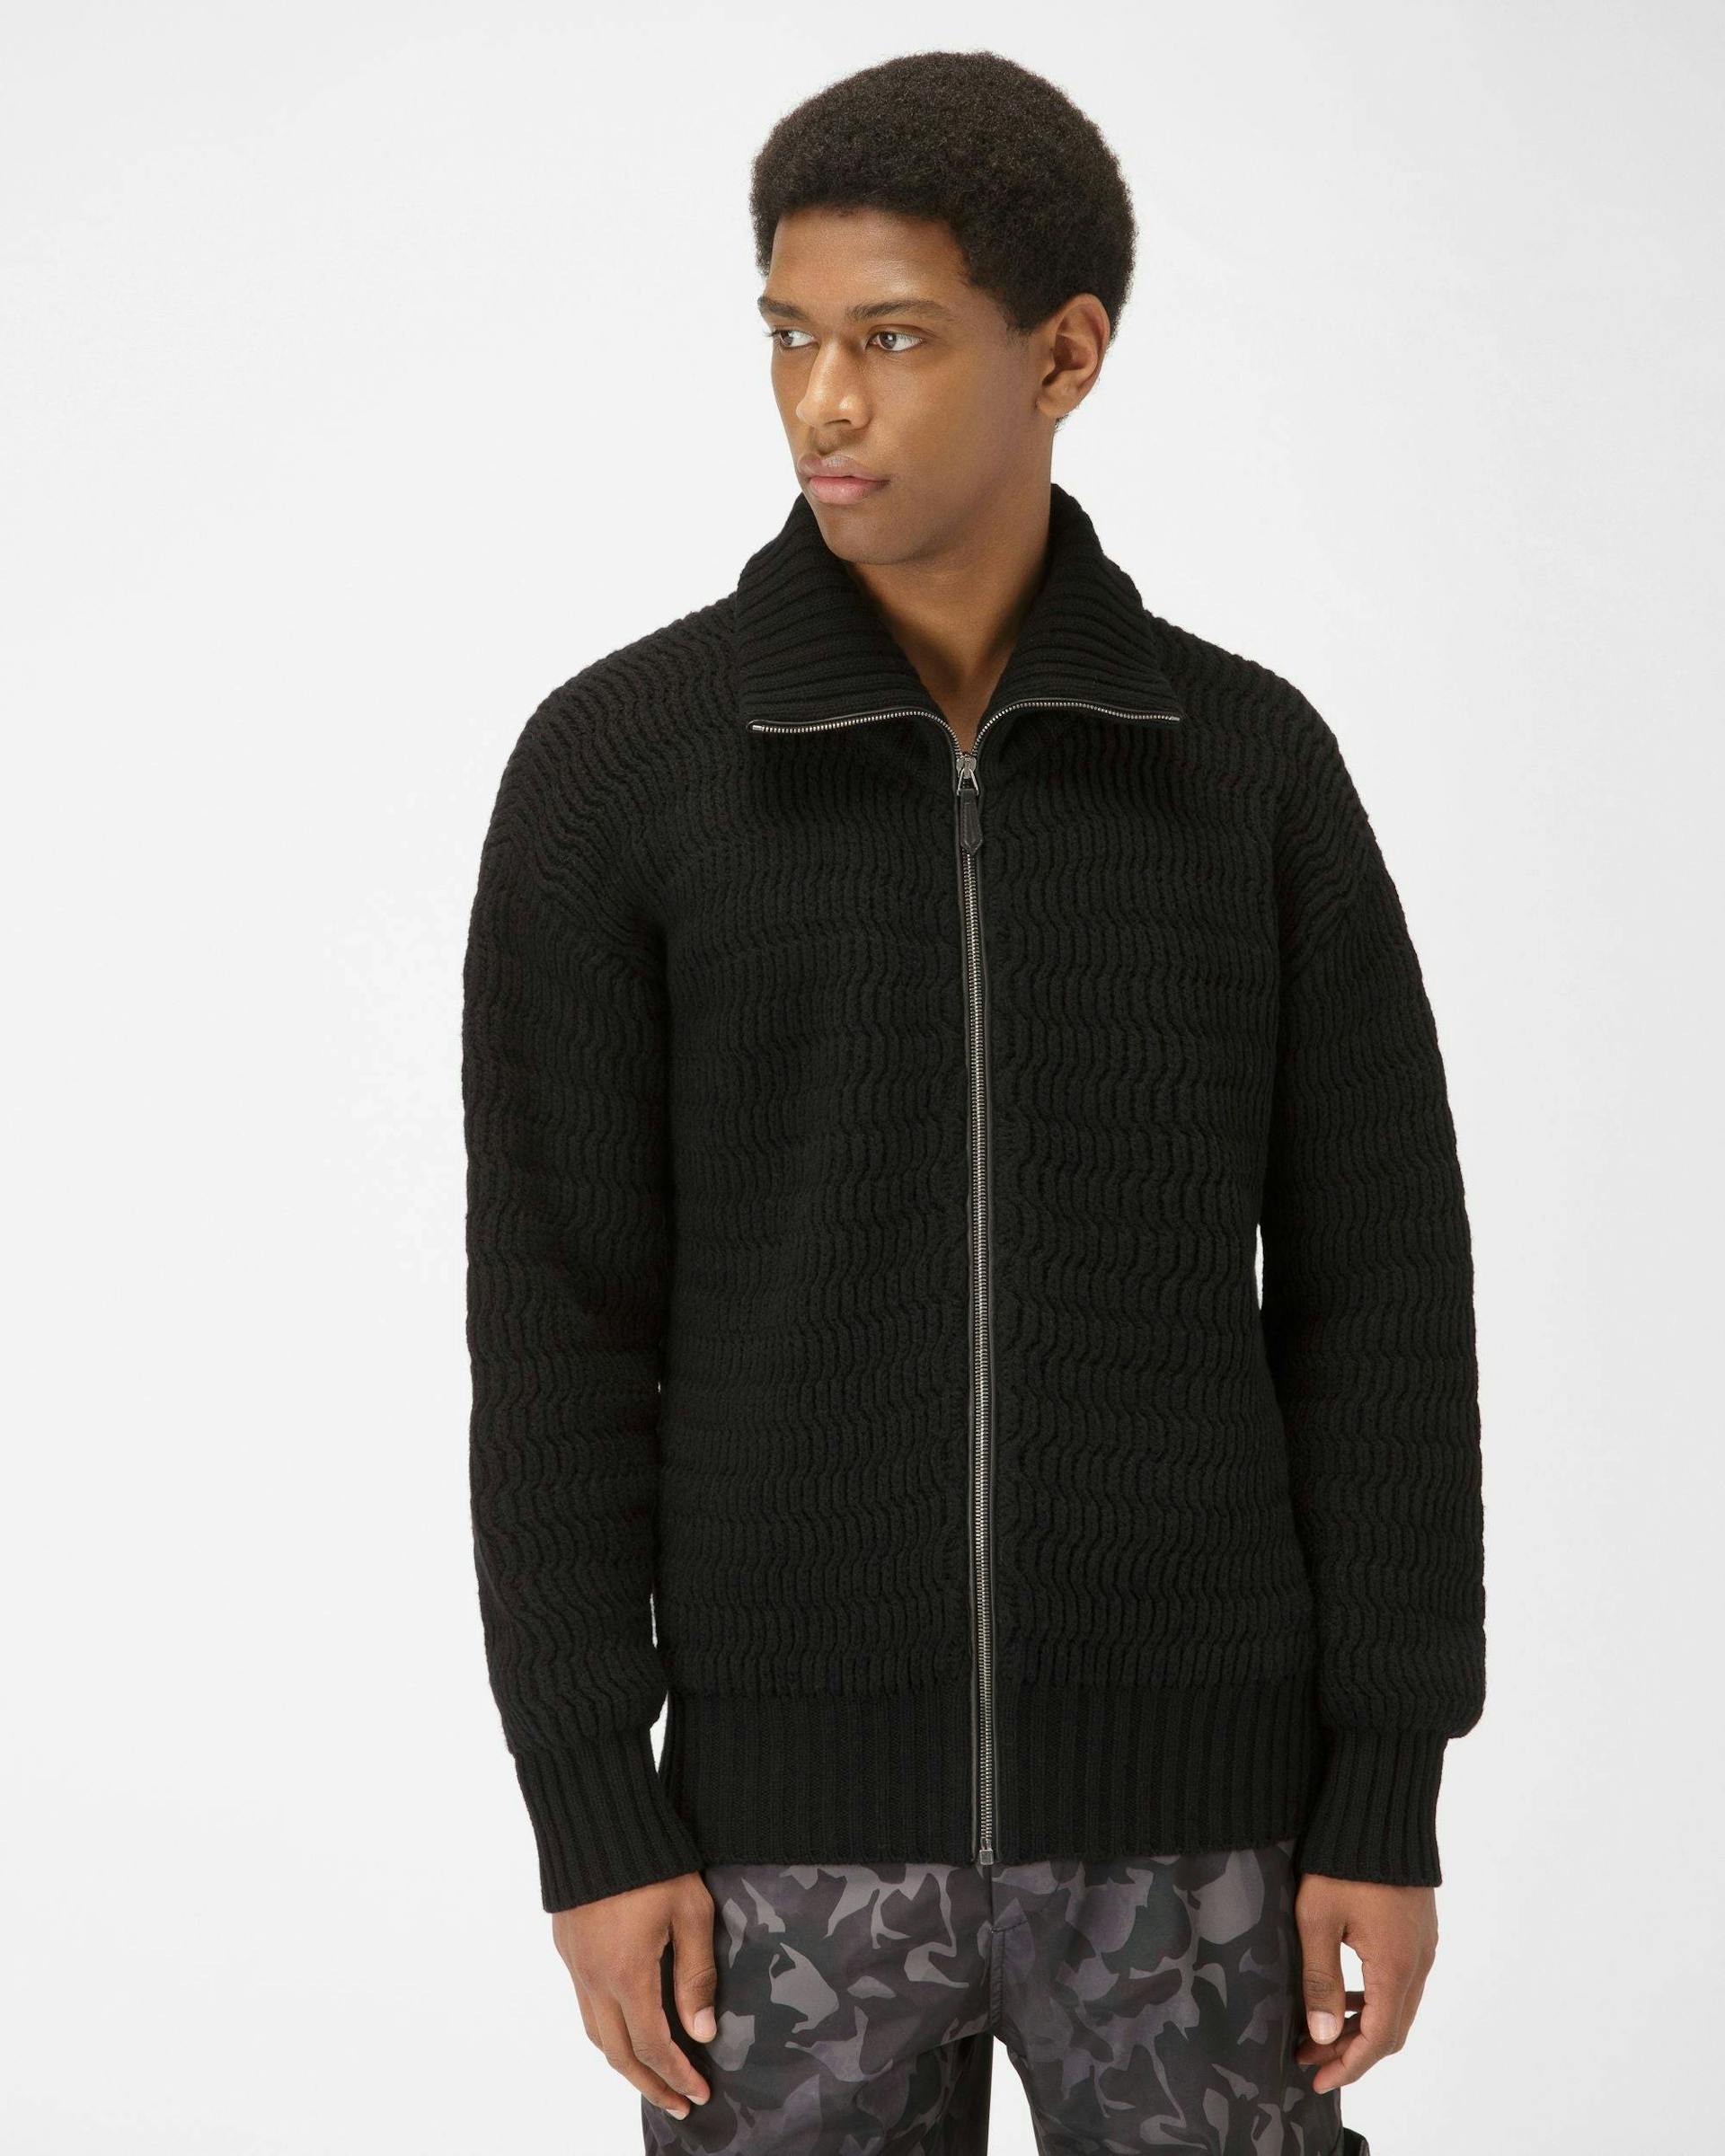 Wool And Cashmere - Bally